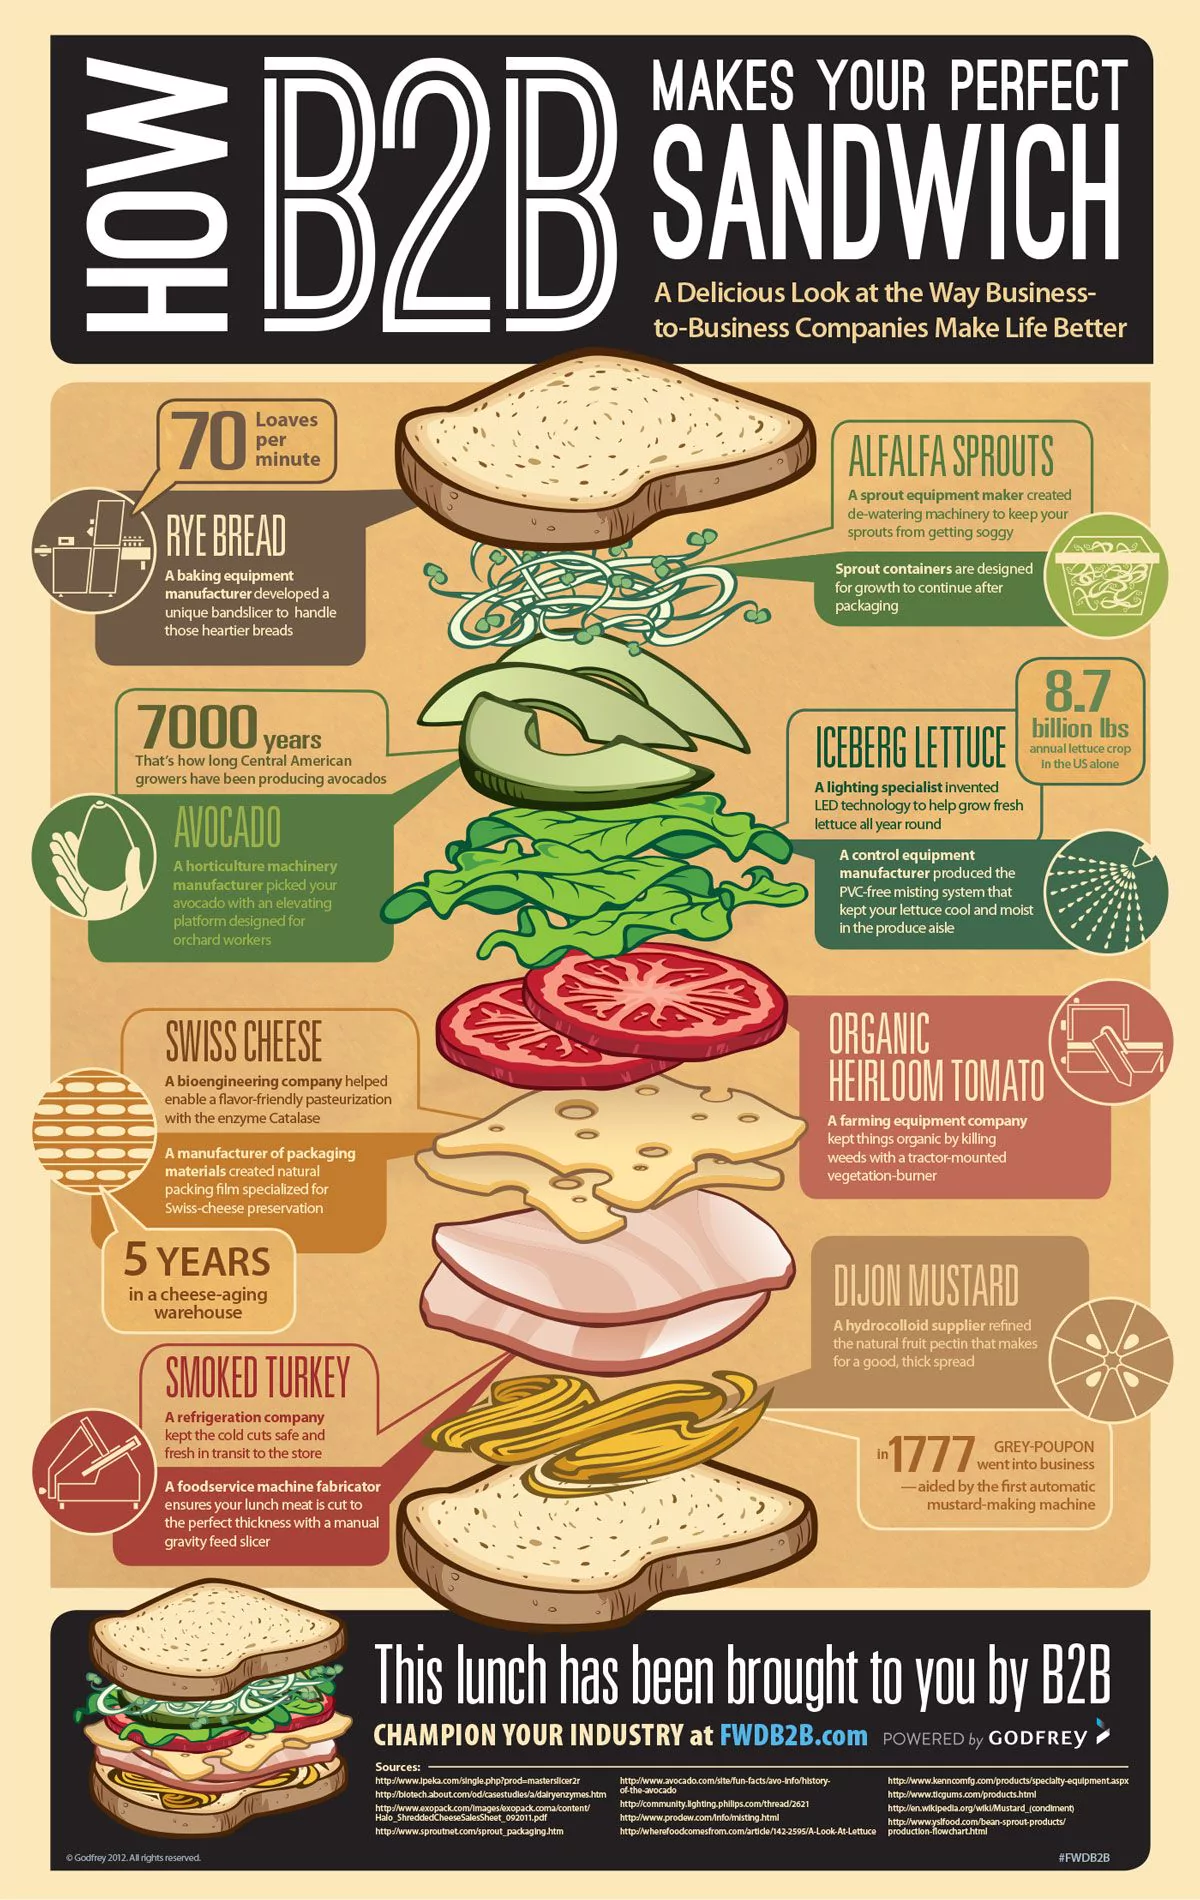 How to Make Your Perfect Sandwich